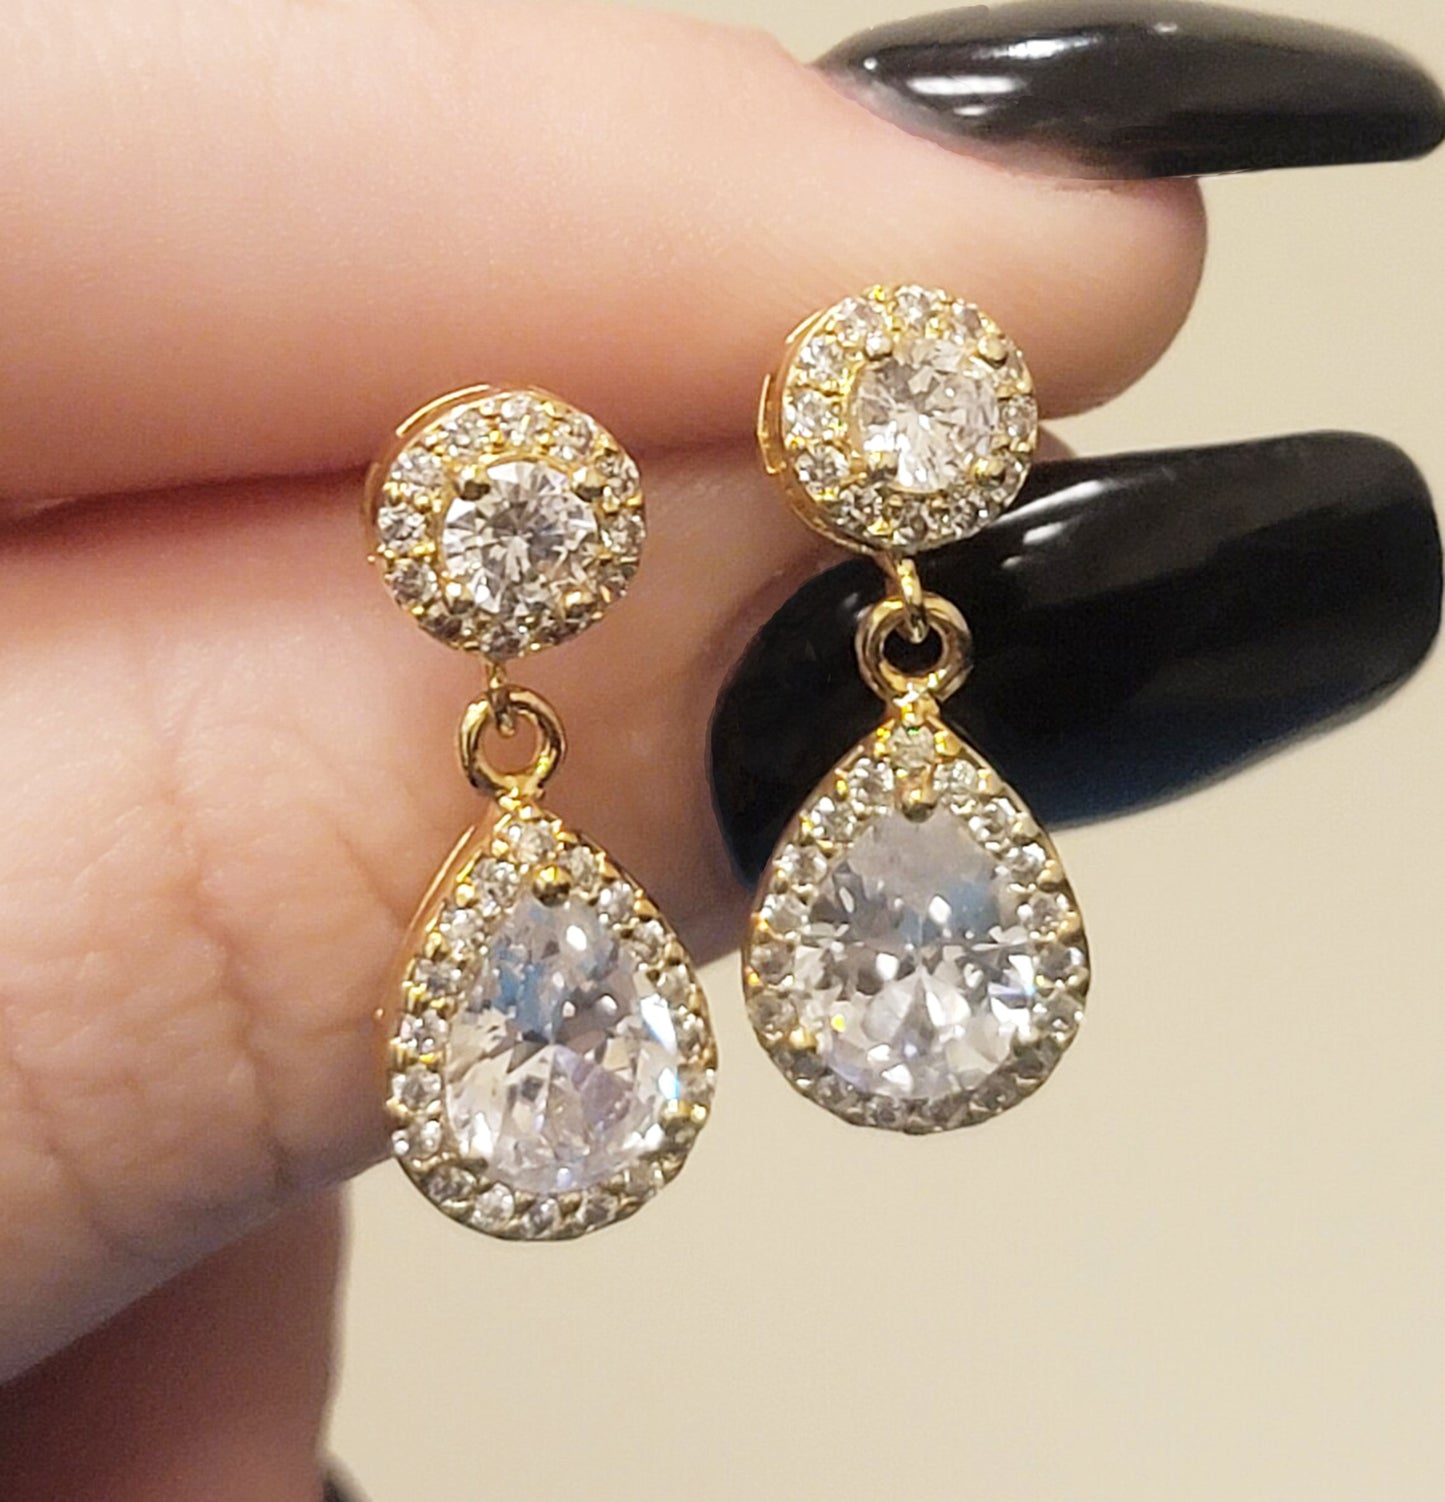 Gold filled special event prom and wedding earrings with many cubic zirconias and large teardrop diamond and held between  woman's thumb and forefinger with black manicure.